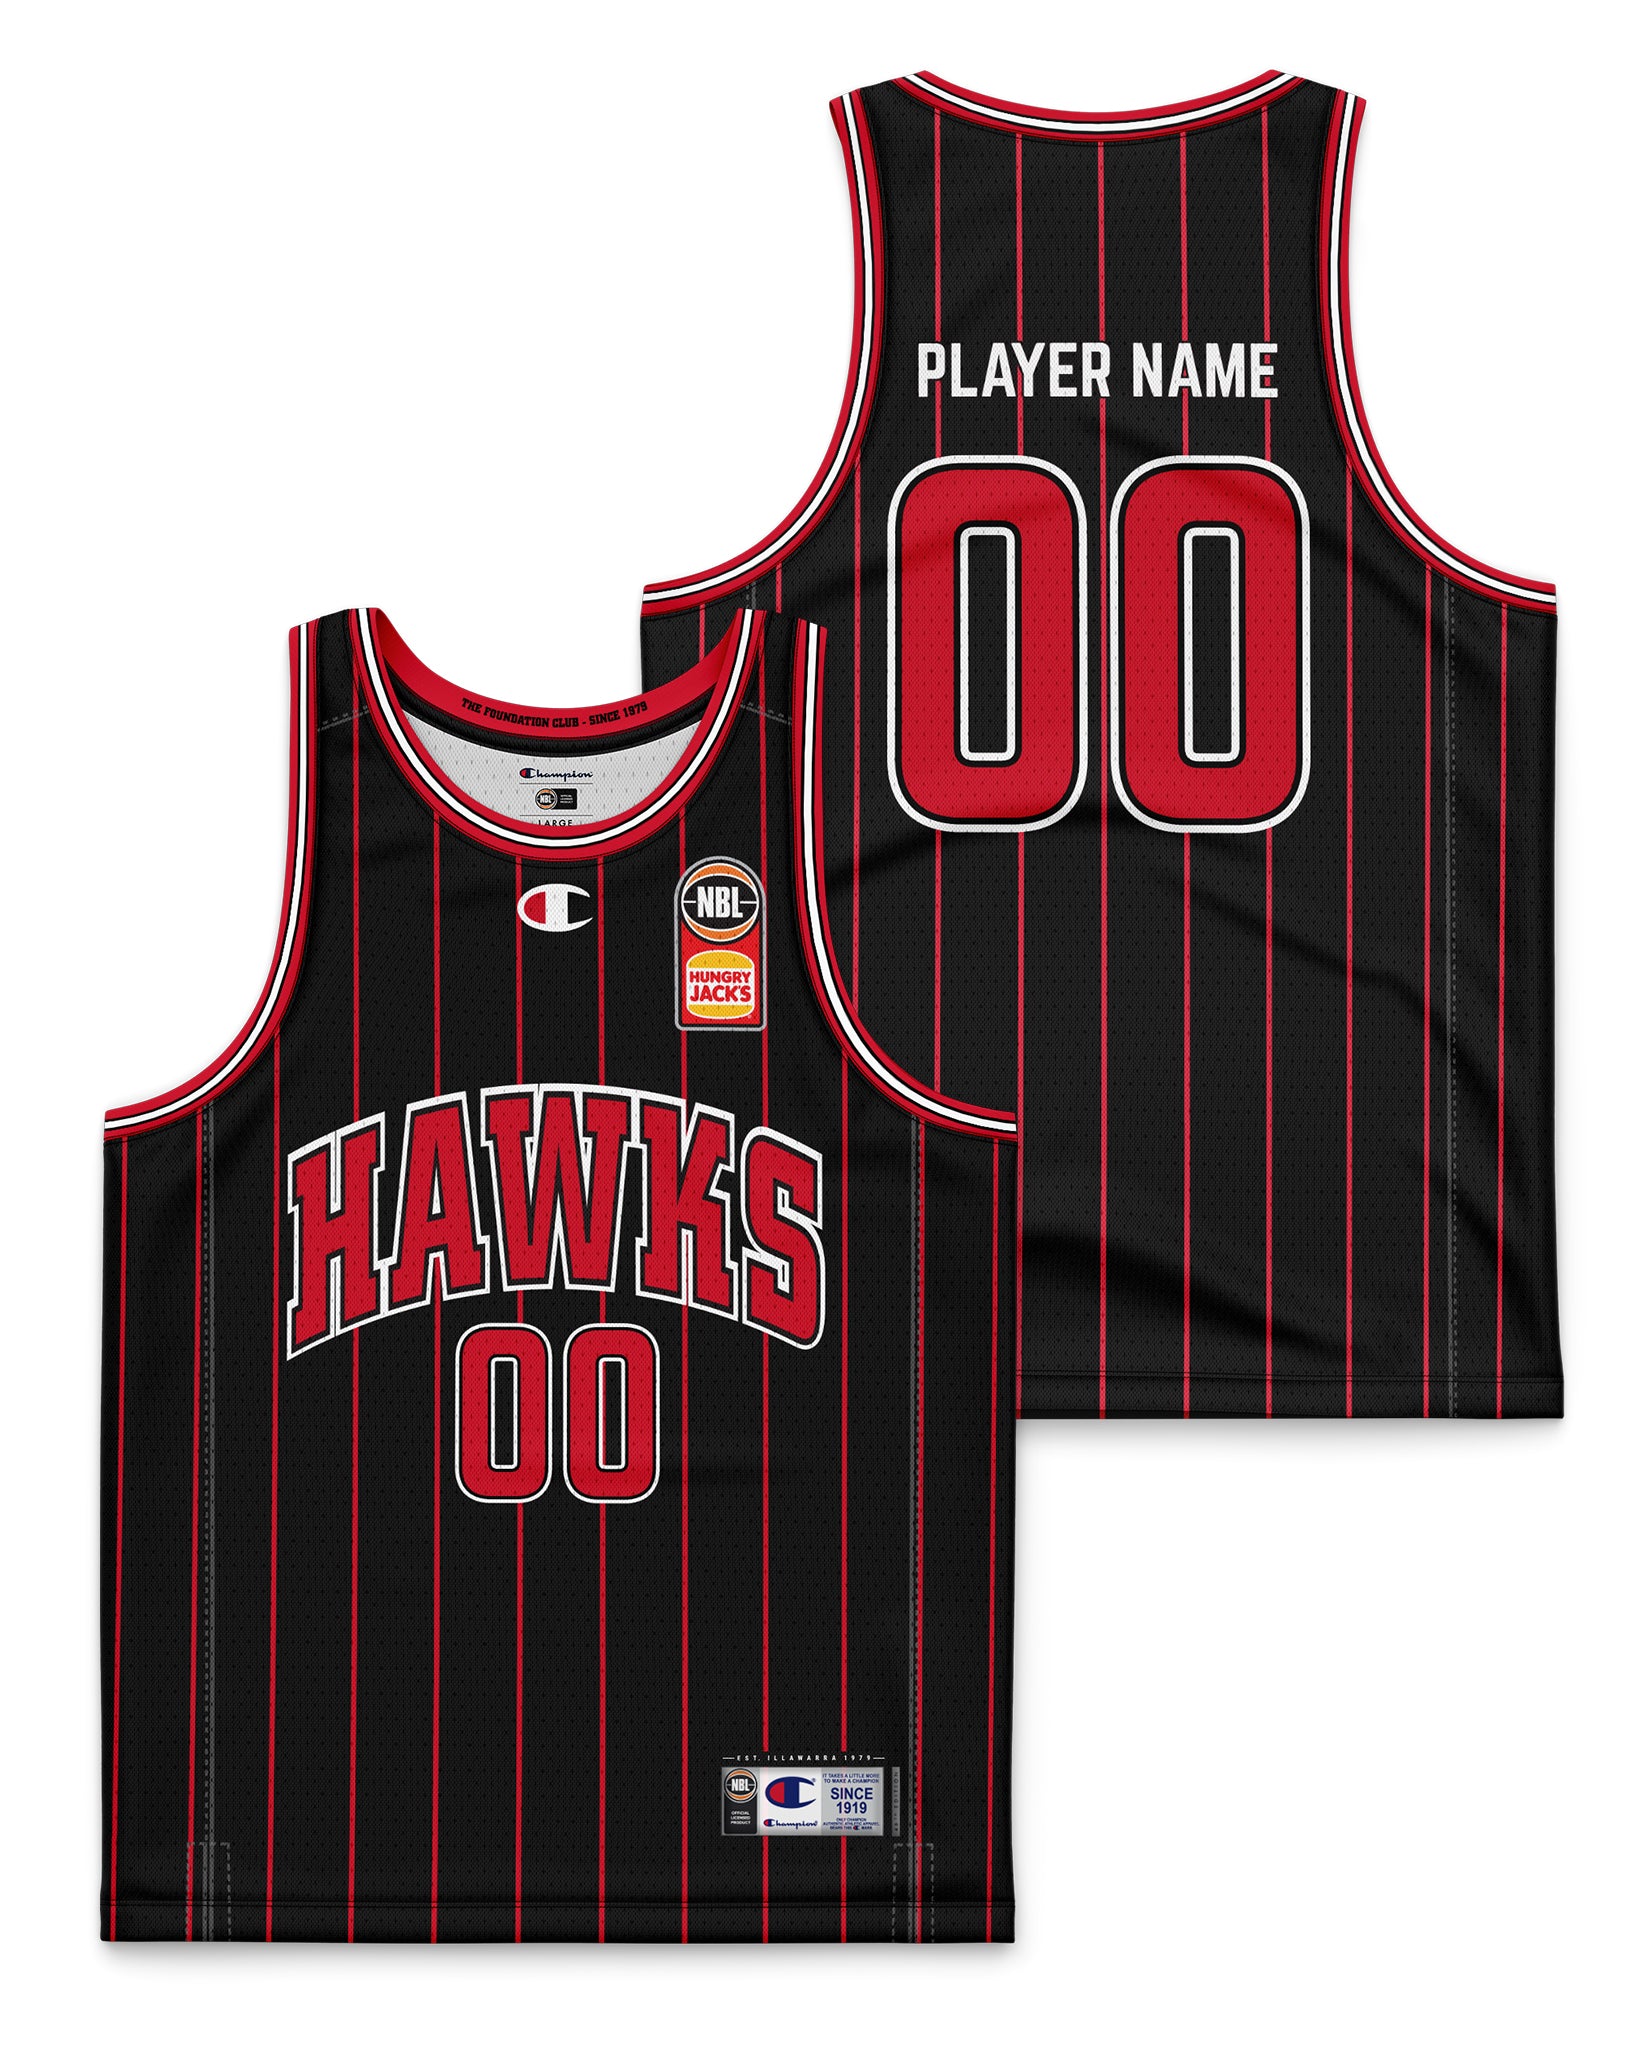 Hawks jersey with player name